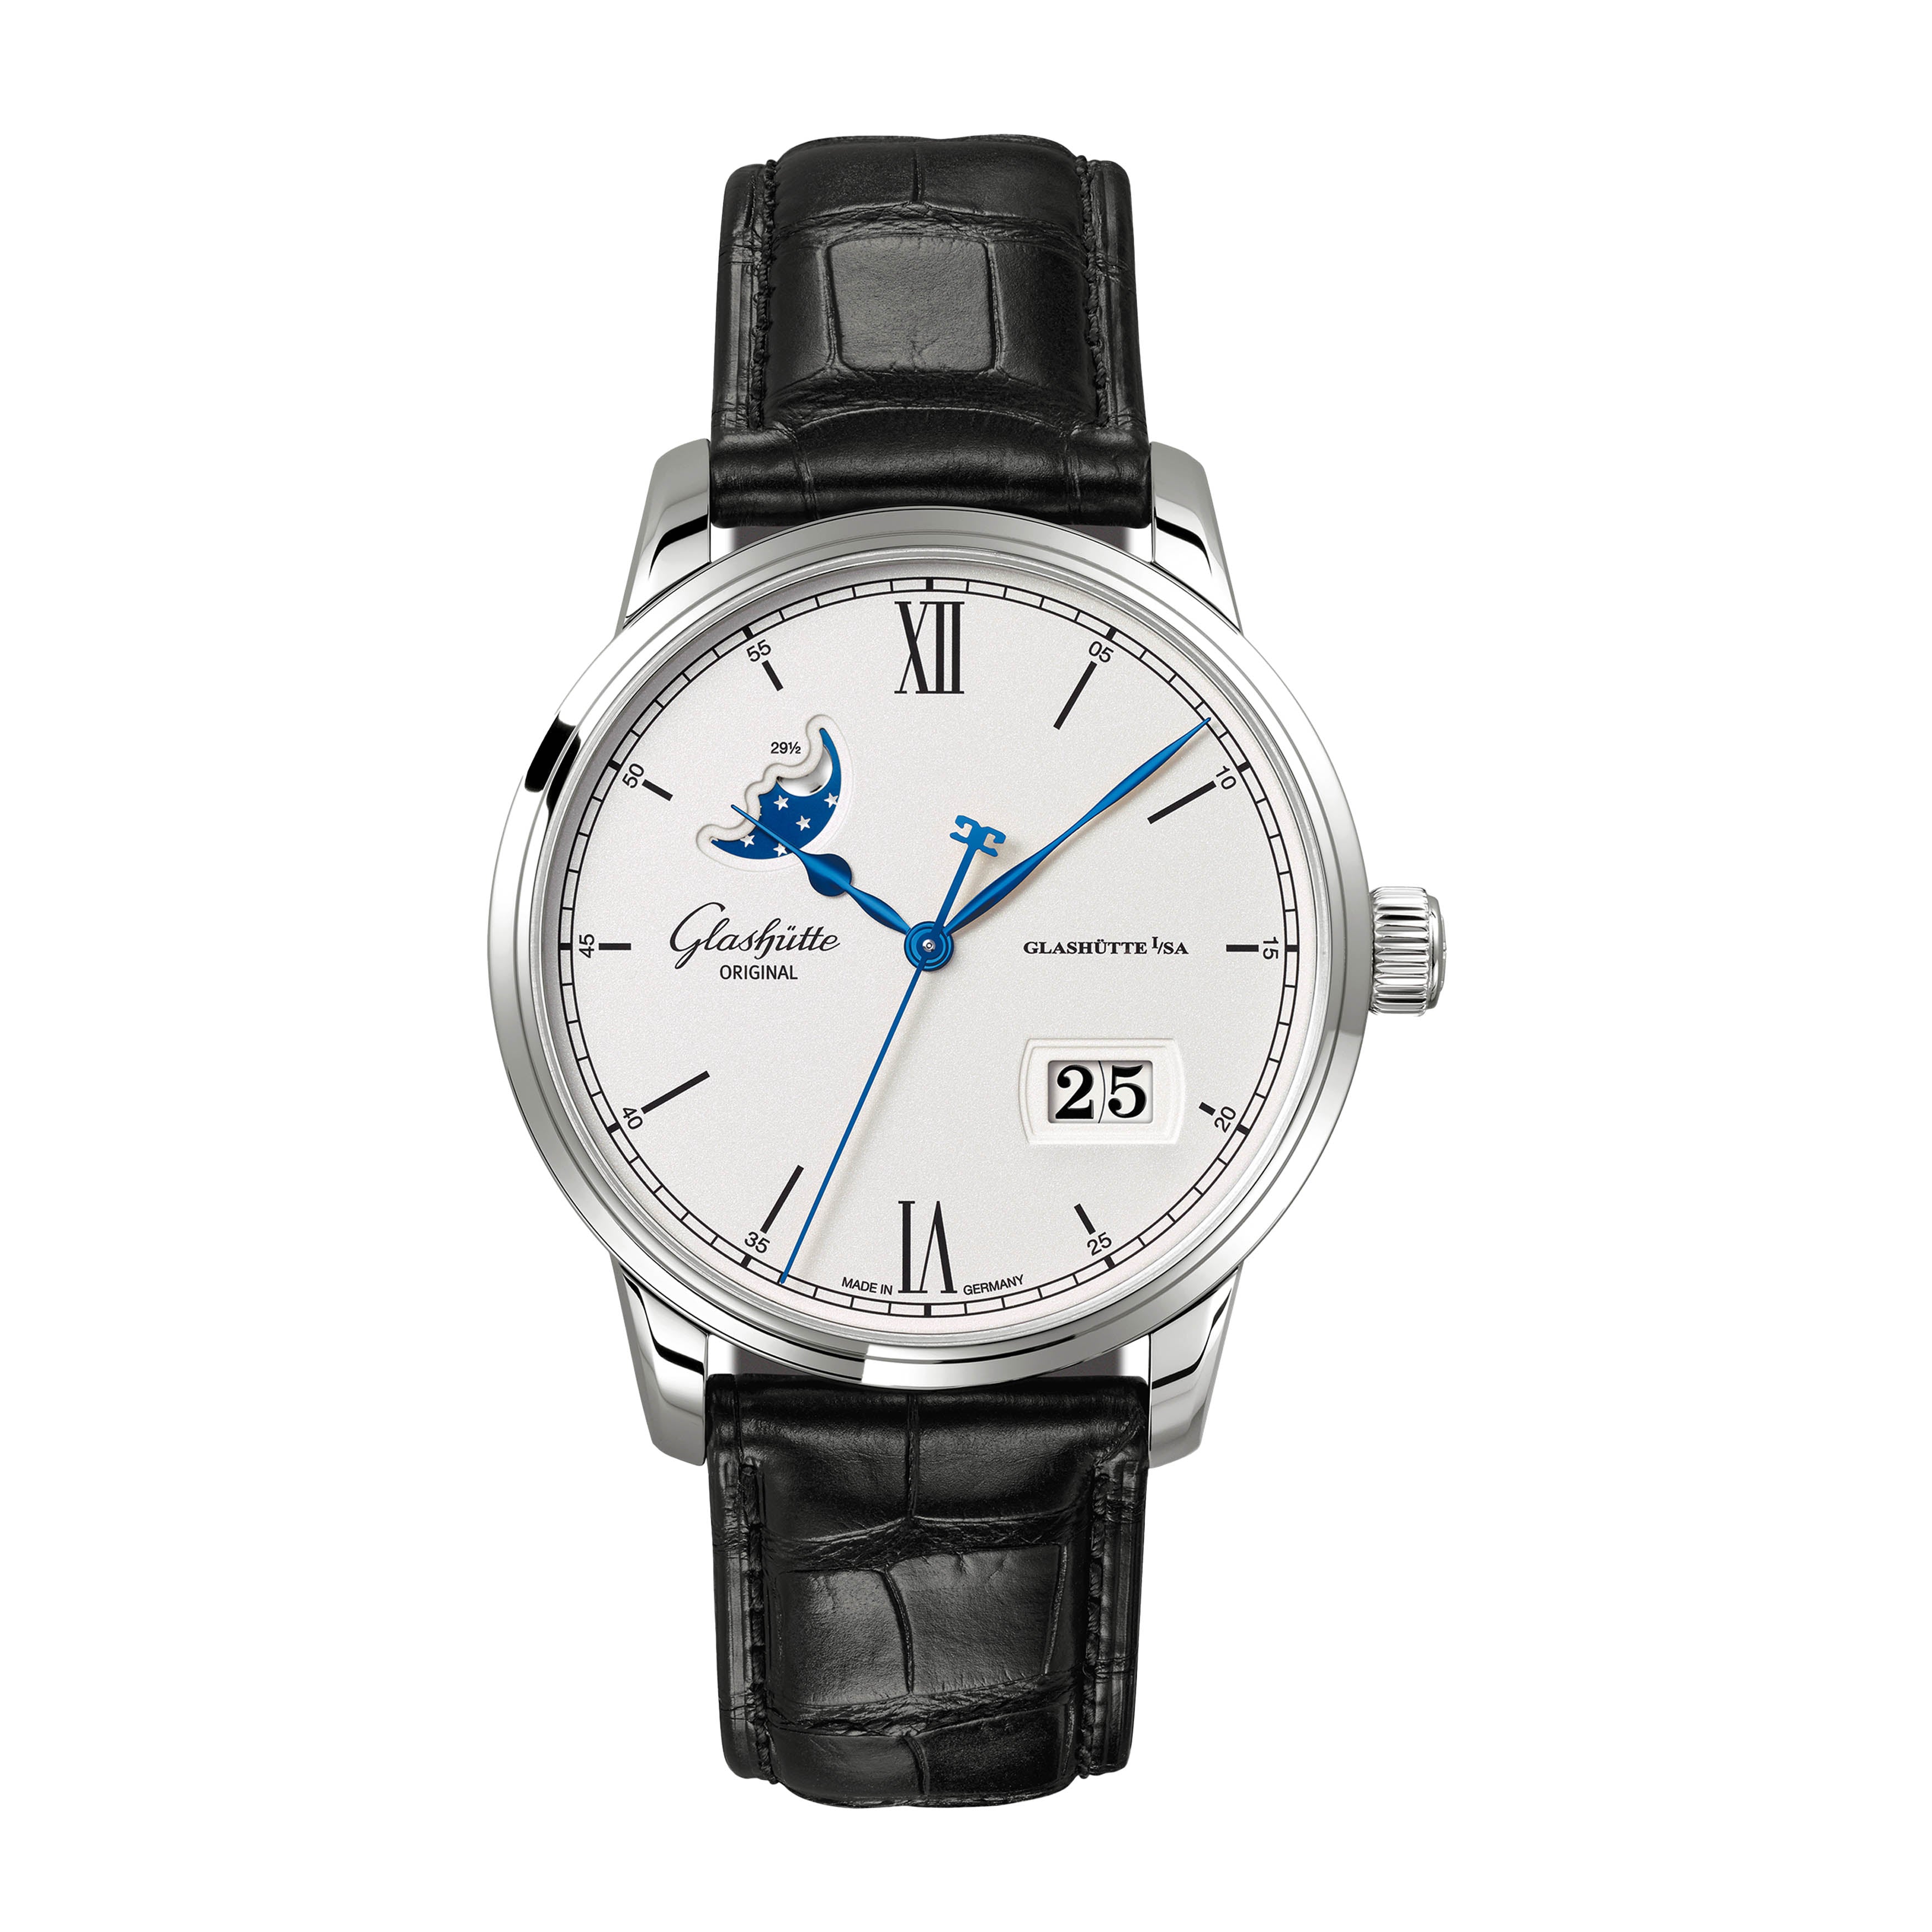 Glashutte Senator Excellence Panorama Date Moonphase Watch, 40mm Silver Dial, 1-36-04-01-02-61